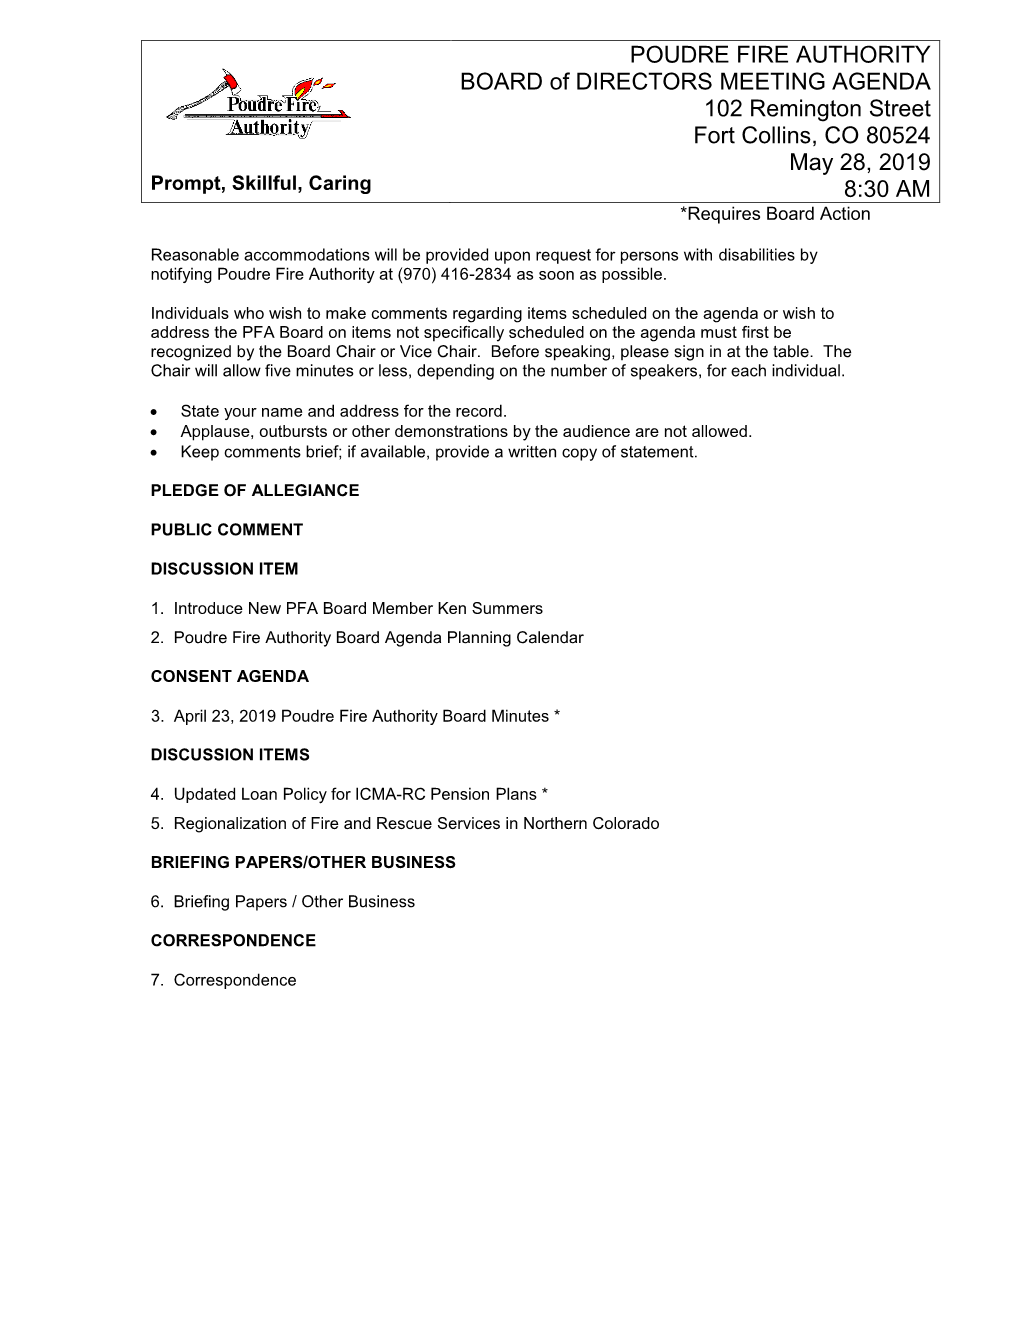 AGENDA 102 Remington Street Fort Collins, CO 80524 May 28, 2019 Prompt, Skillful, Caring 8:30 AM *Requires Board Action